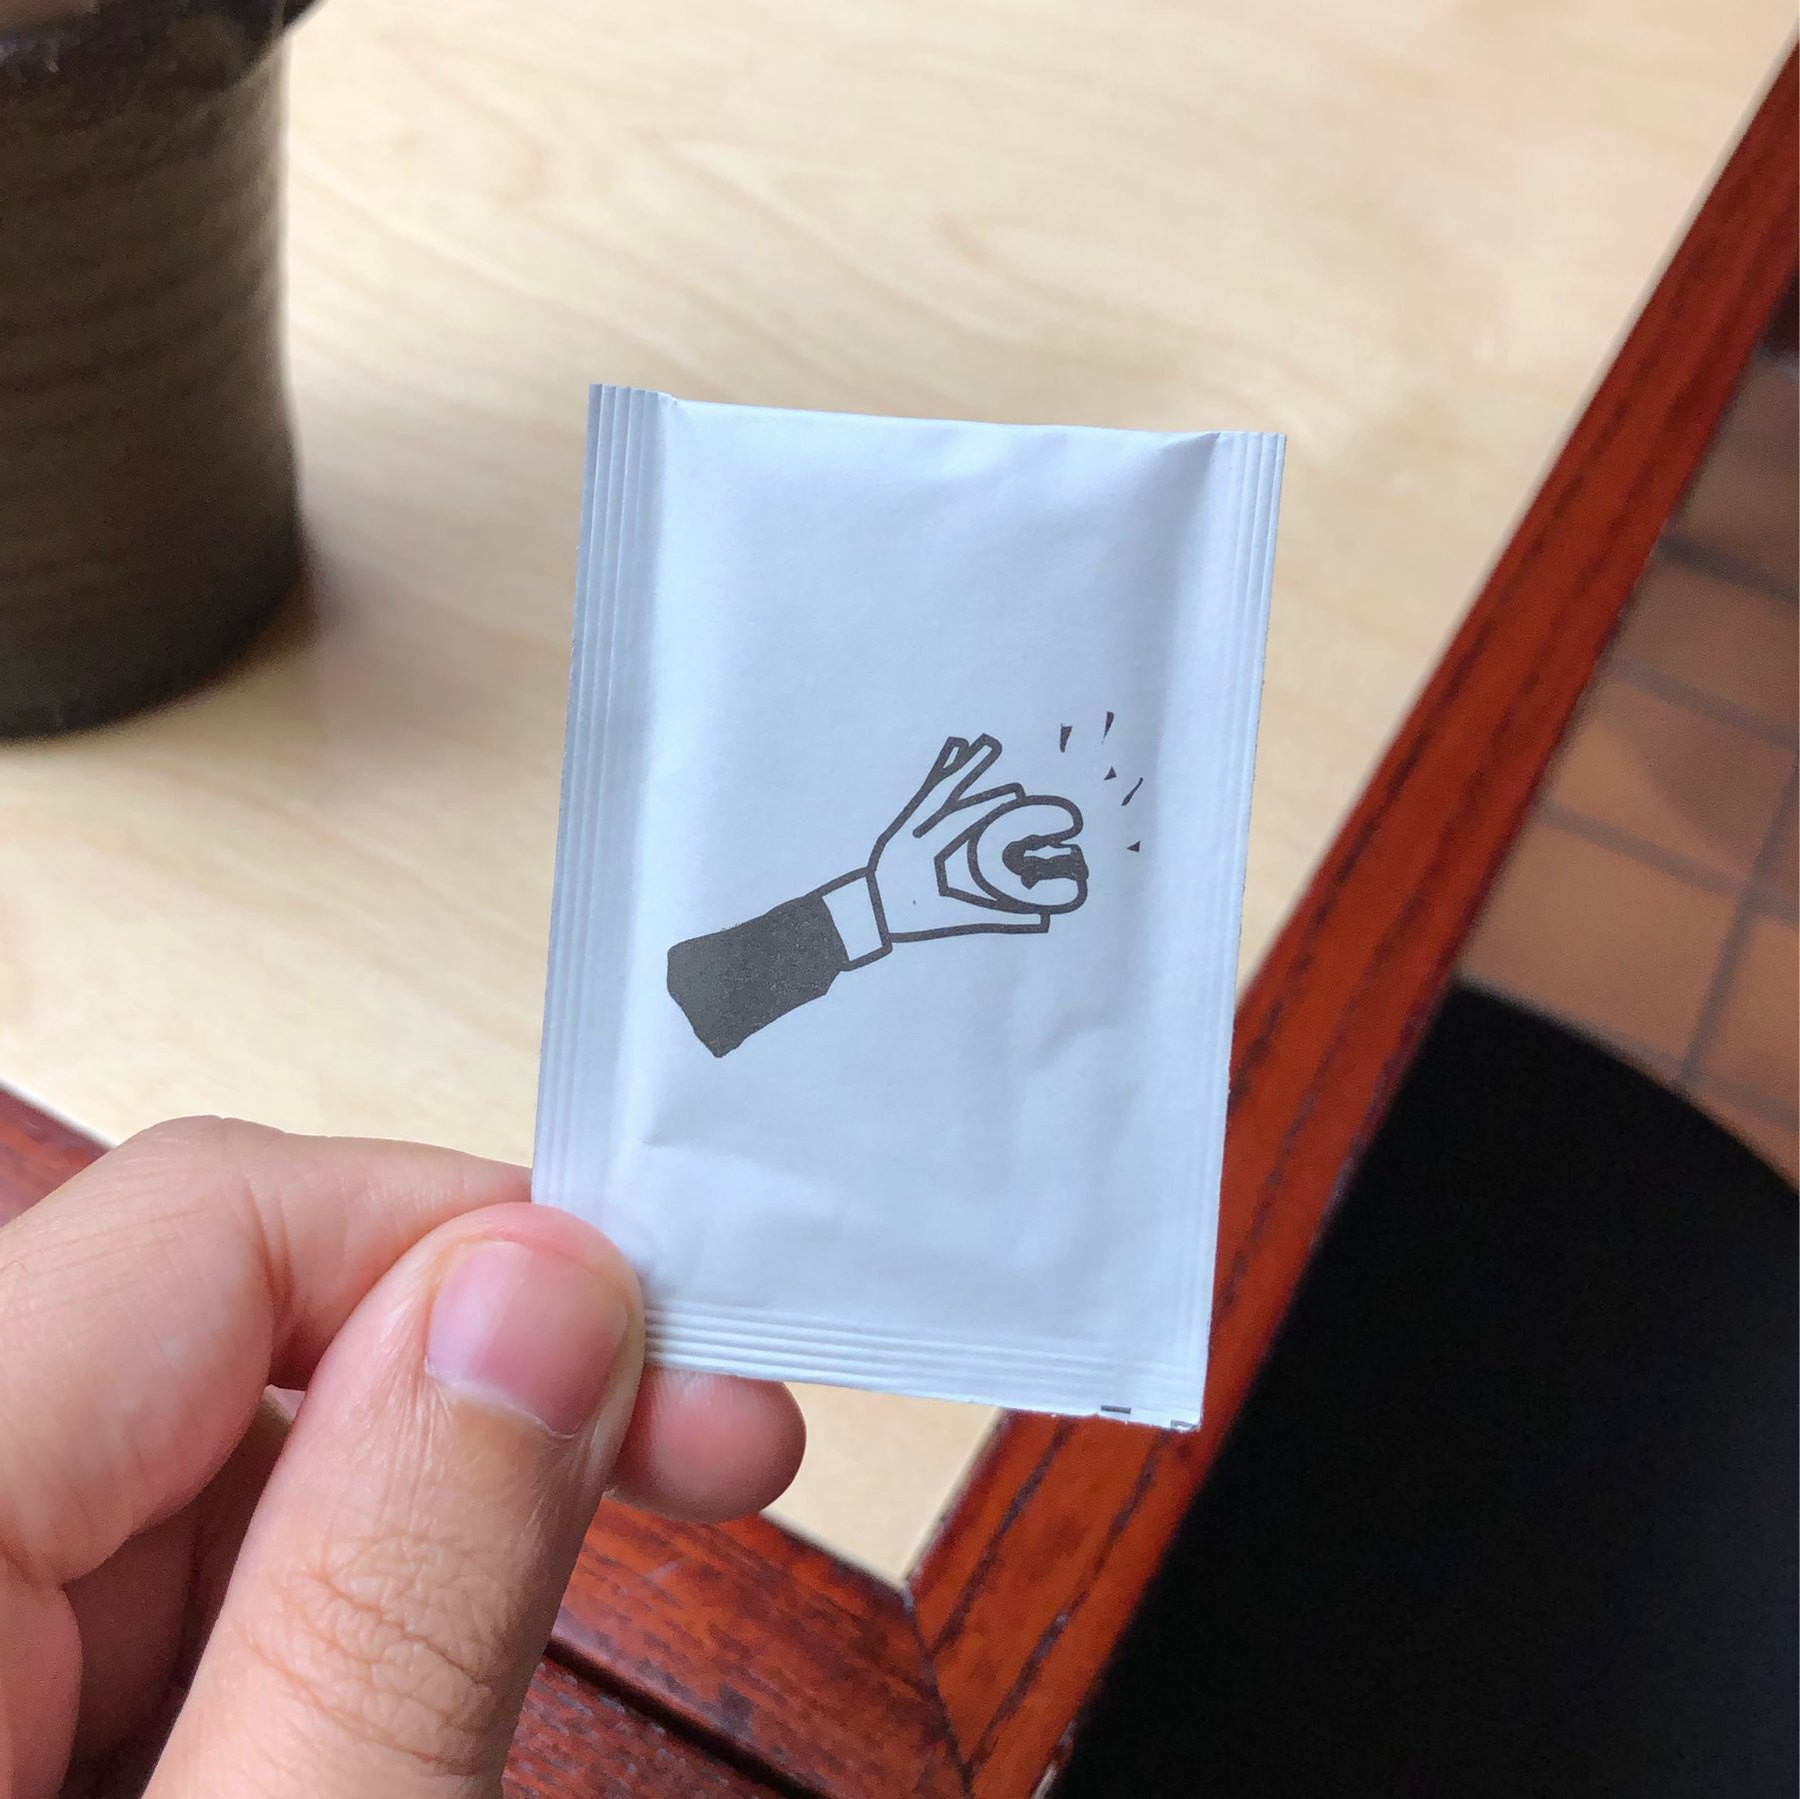 Illustration of the hand wipes with a hand holding a bun.